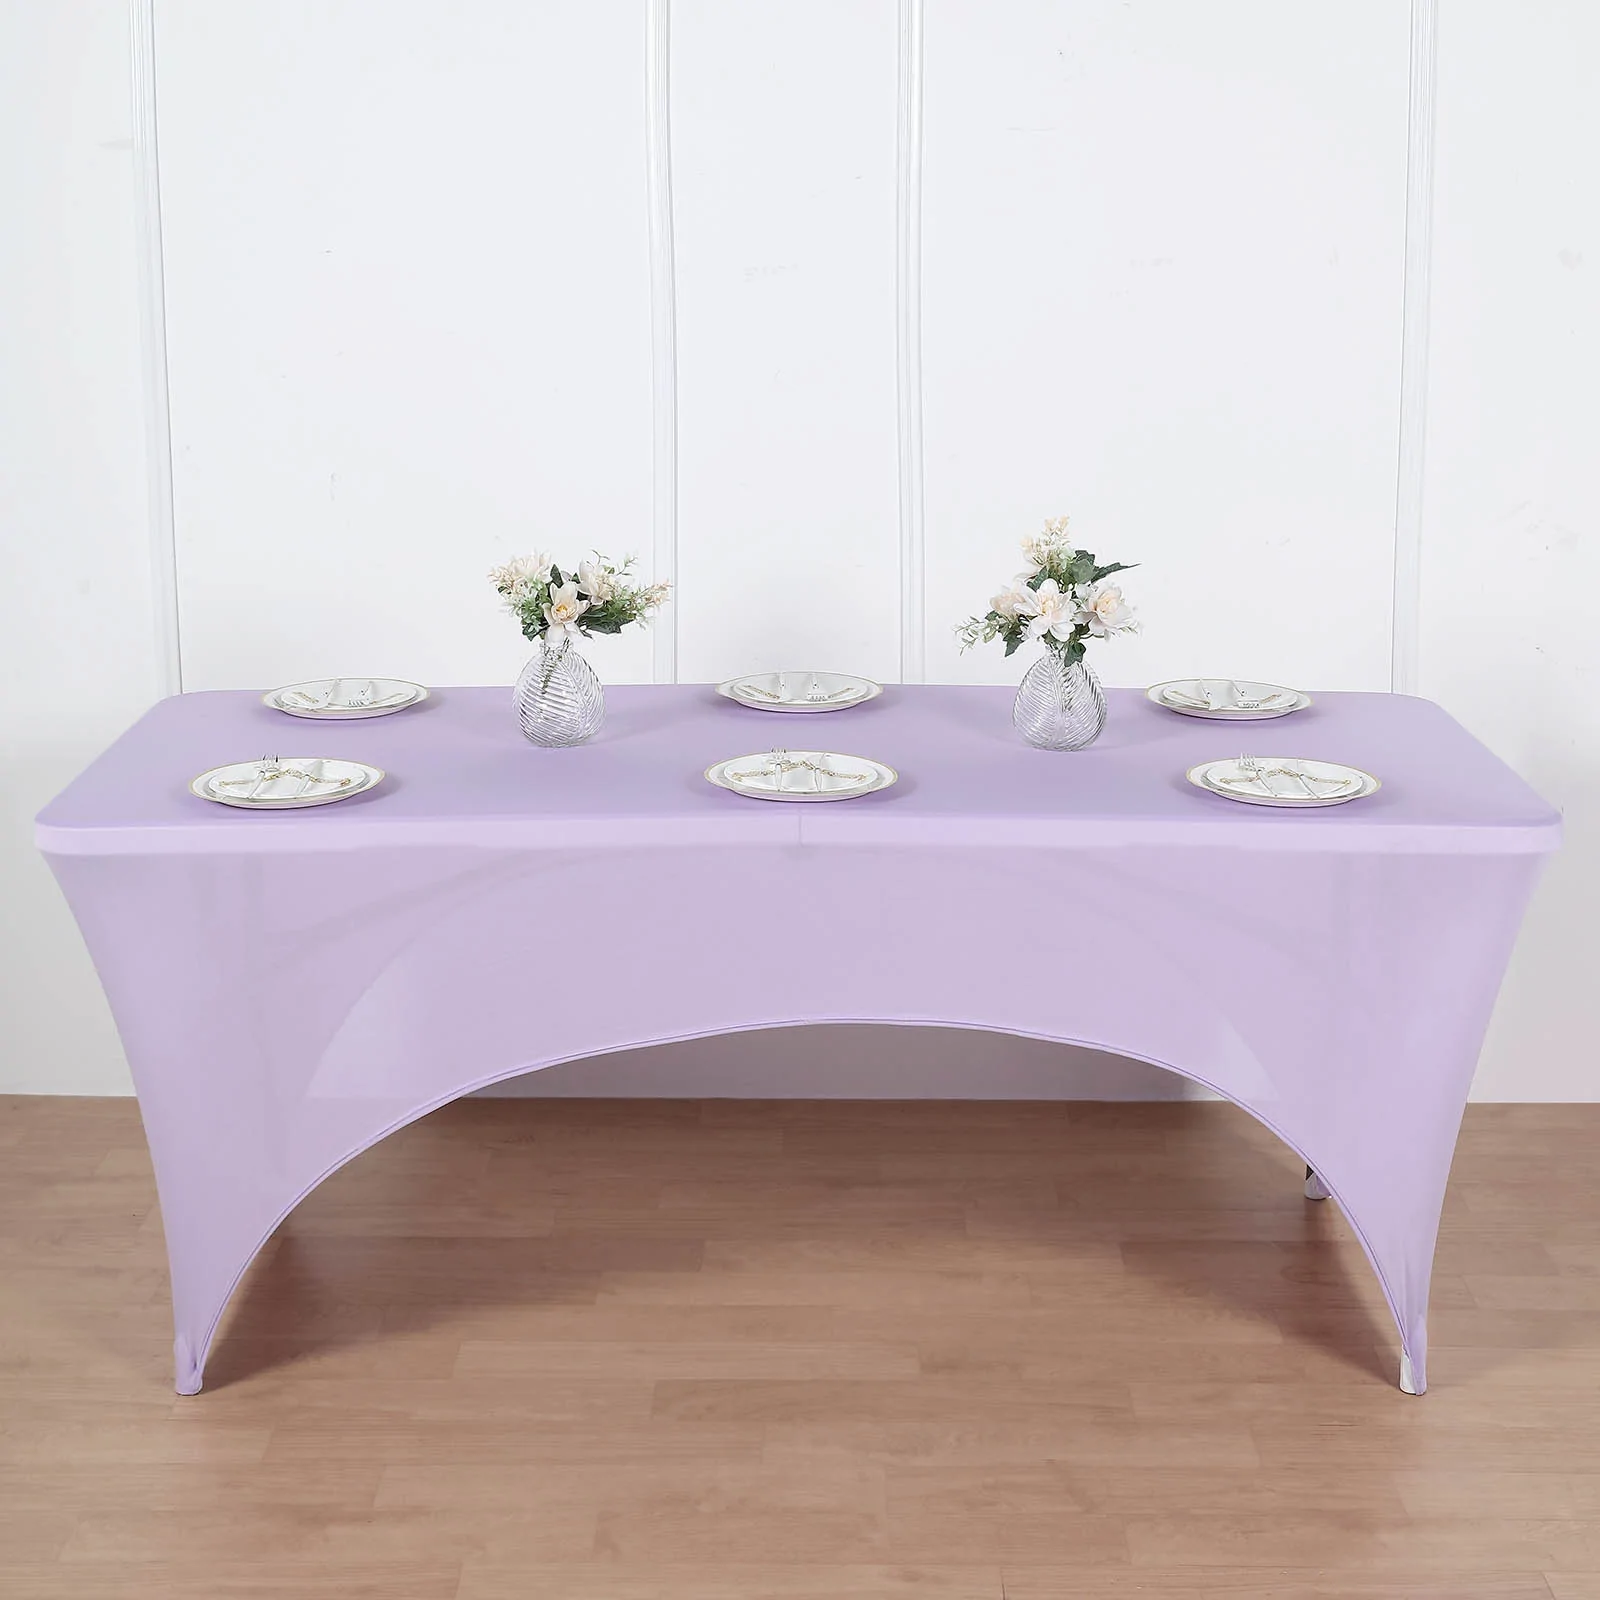 Lavender - 6 Ft Rectangular Spandex Table Cover Wedding Party - $33.88